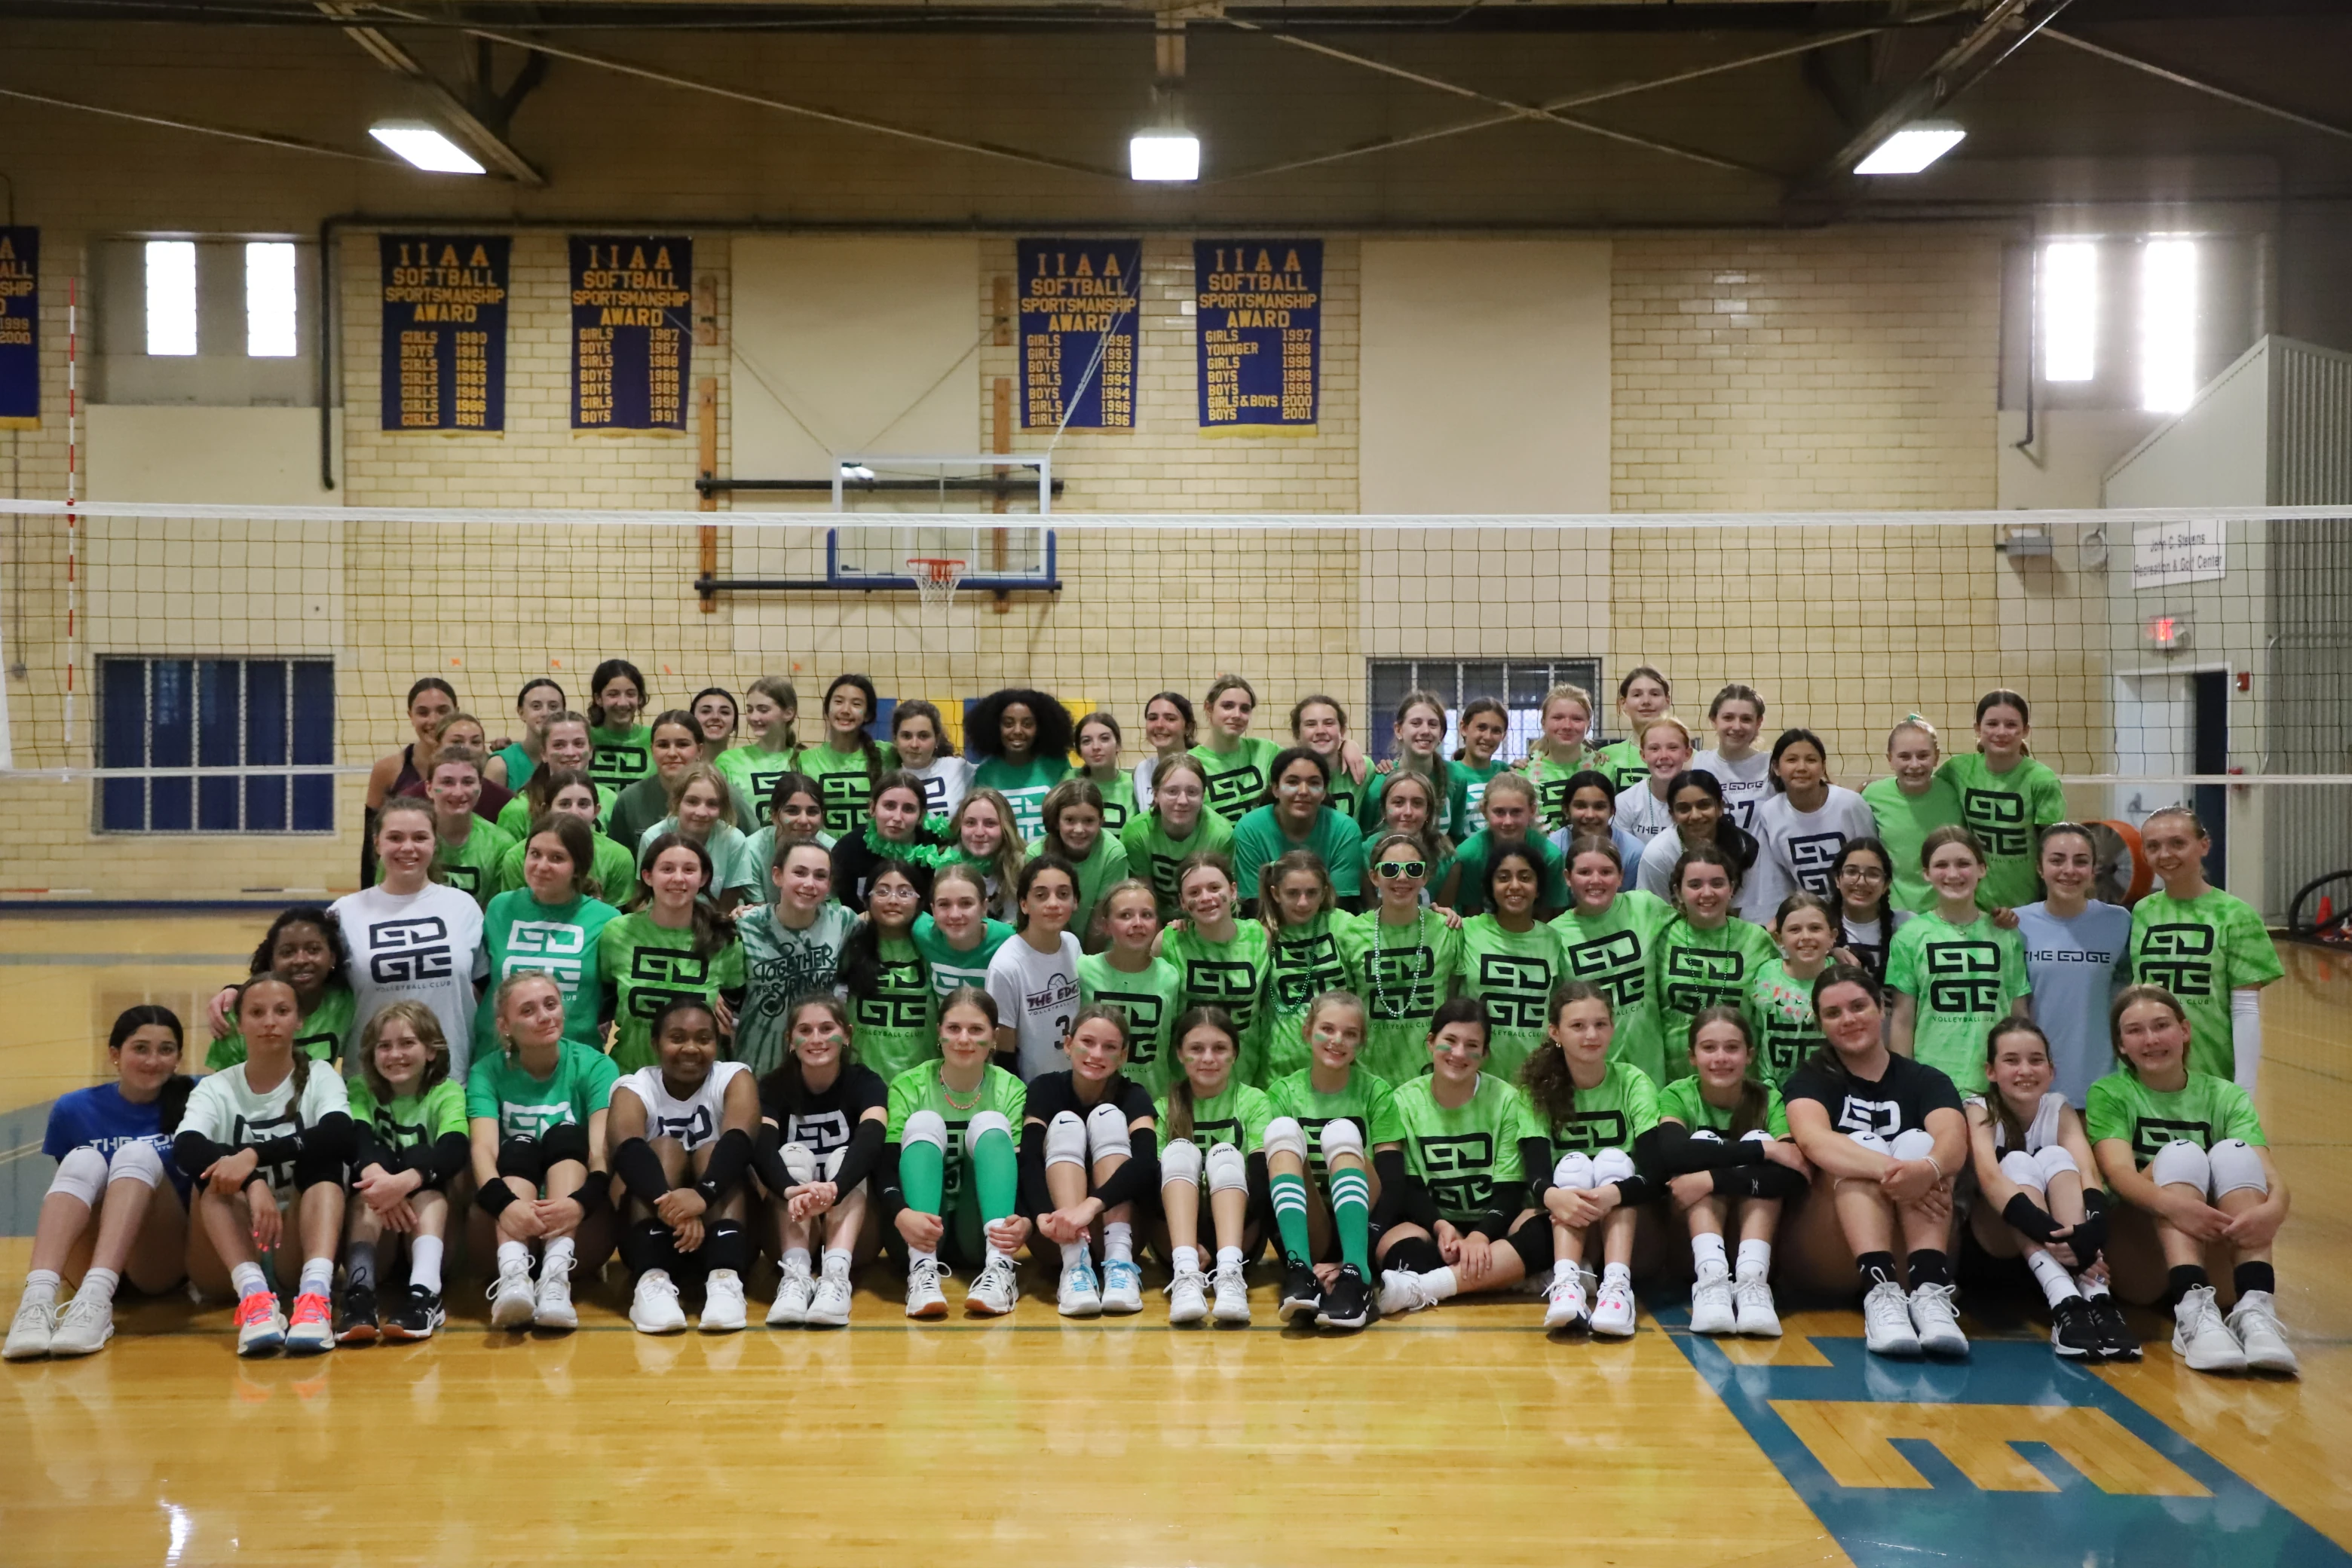 A large group picture of Edge athletes wearing green to support mental health awareness